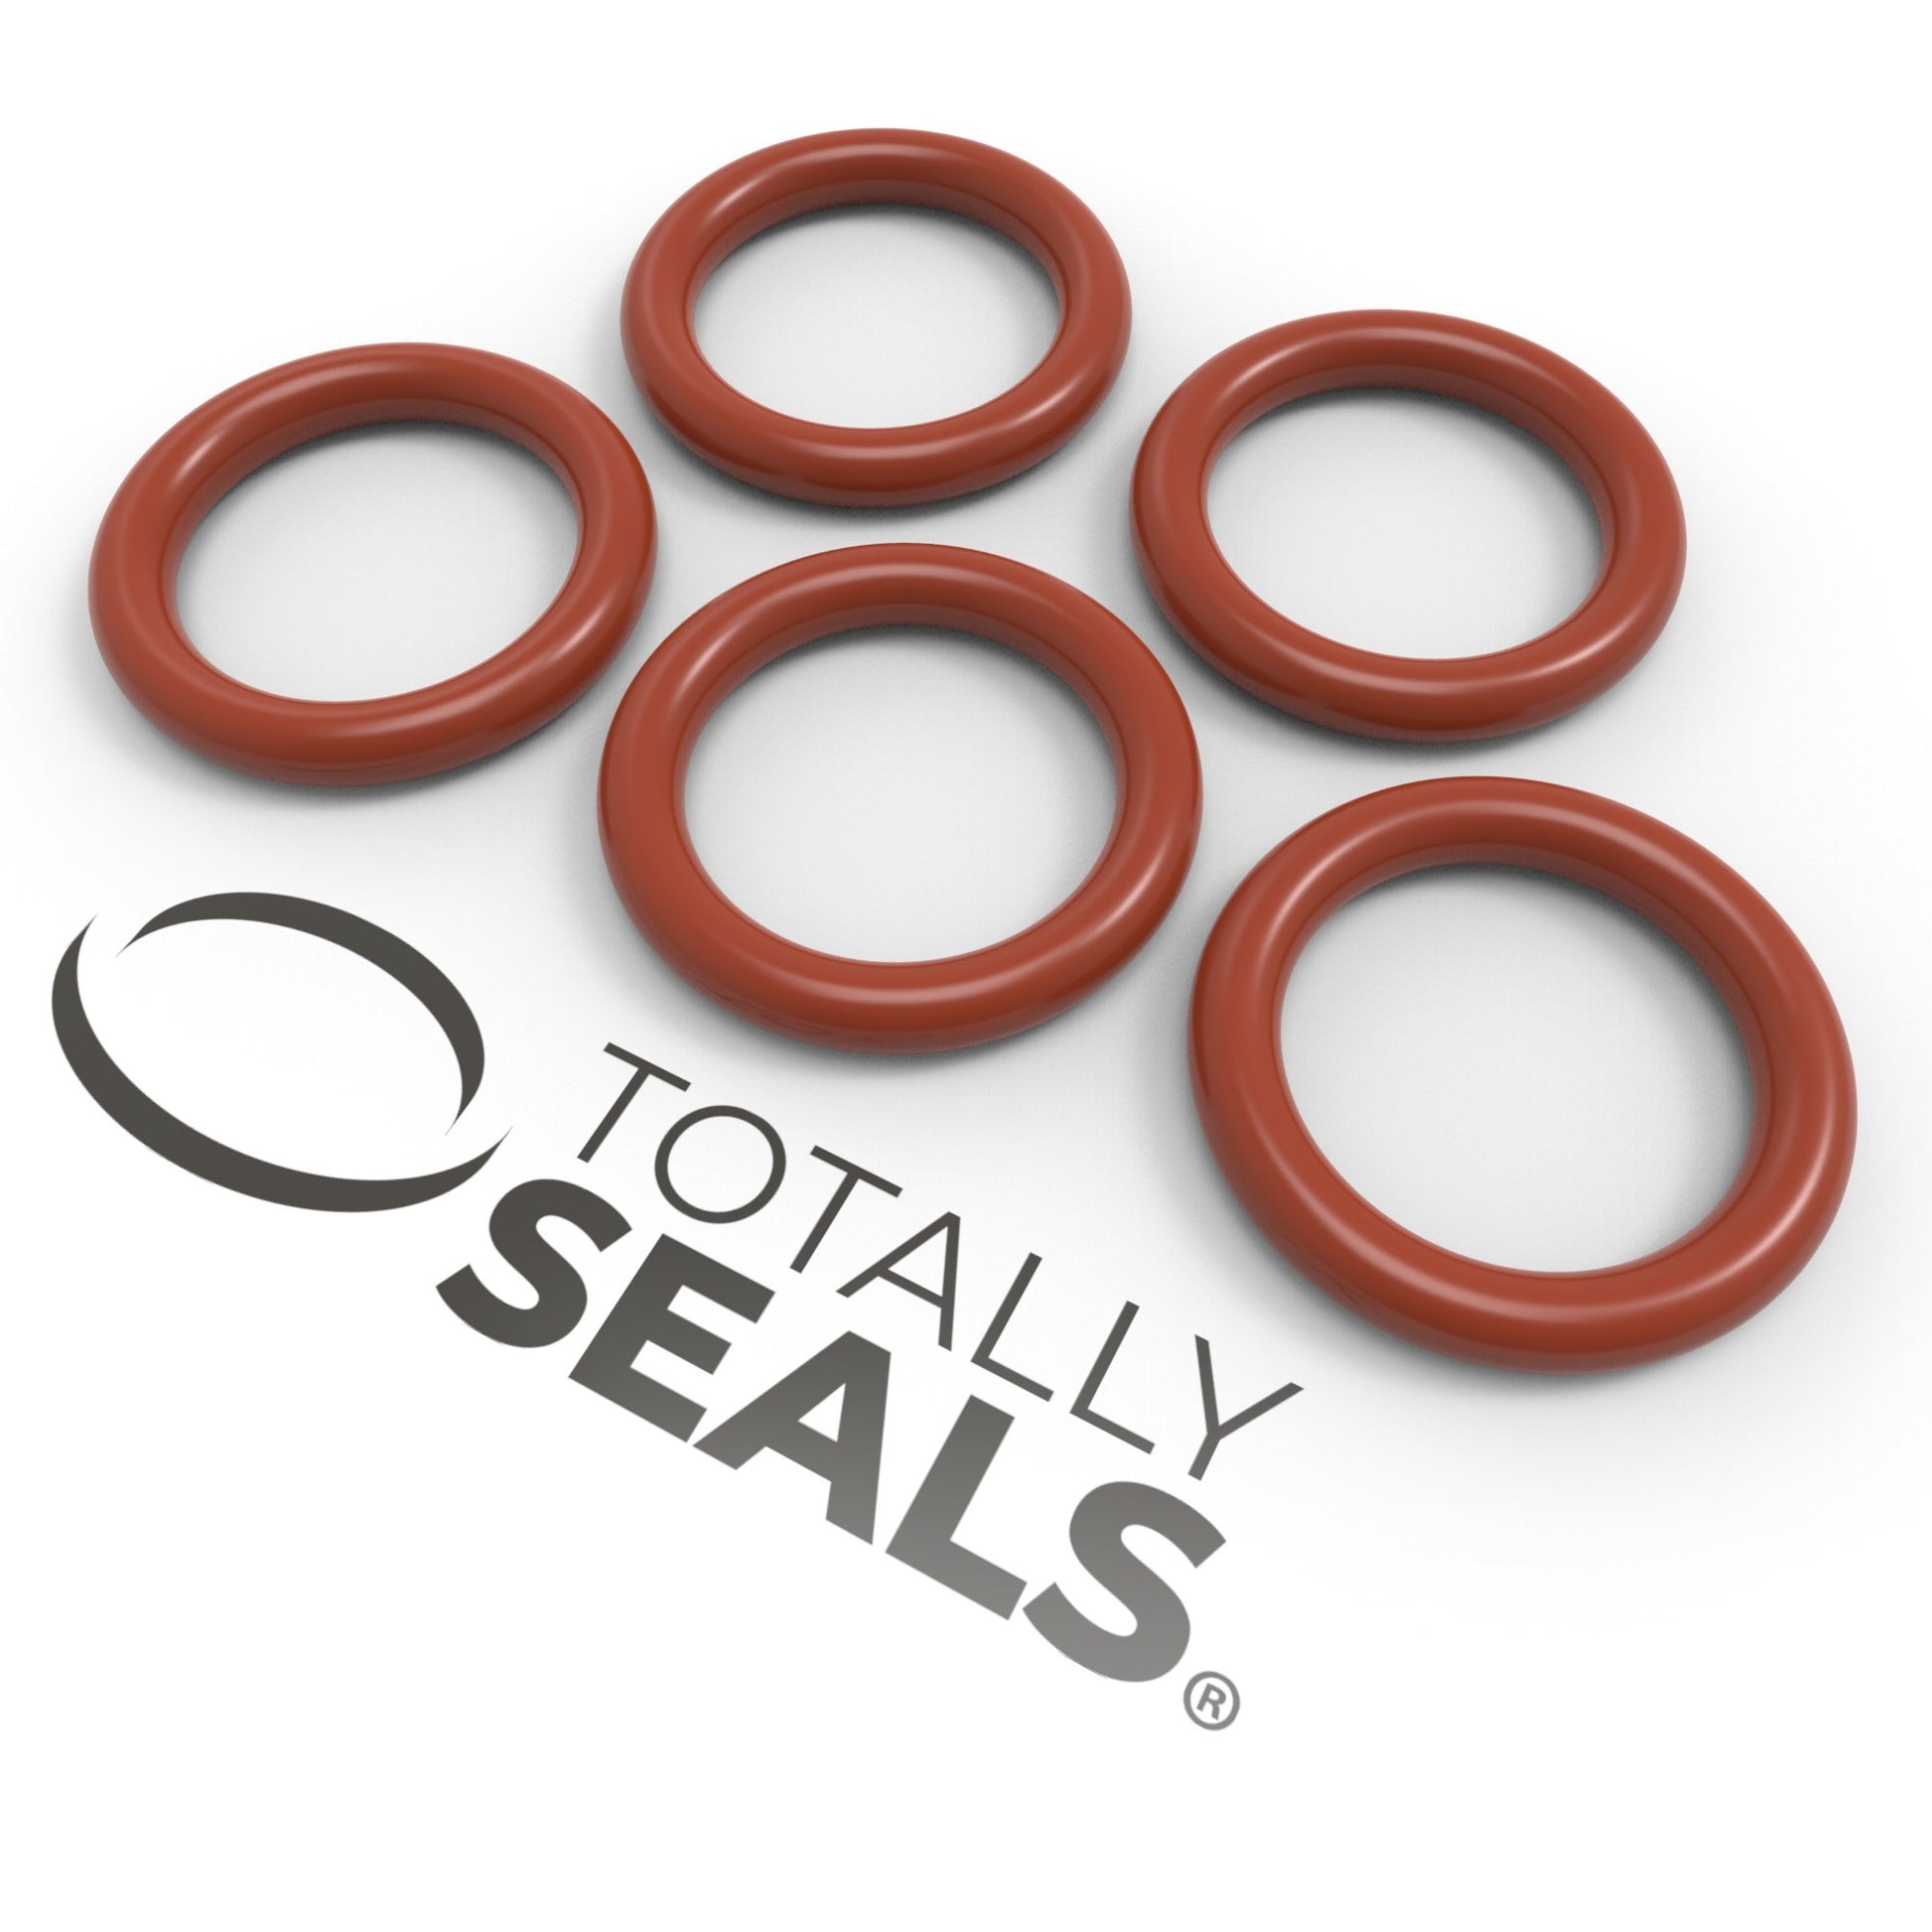 17mm x 3mm (23mm OD) Silicone O-Rings - Totally Seals®